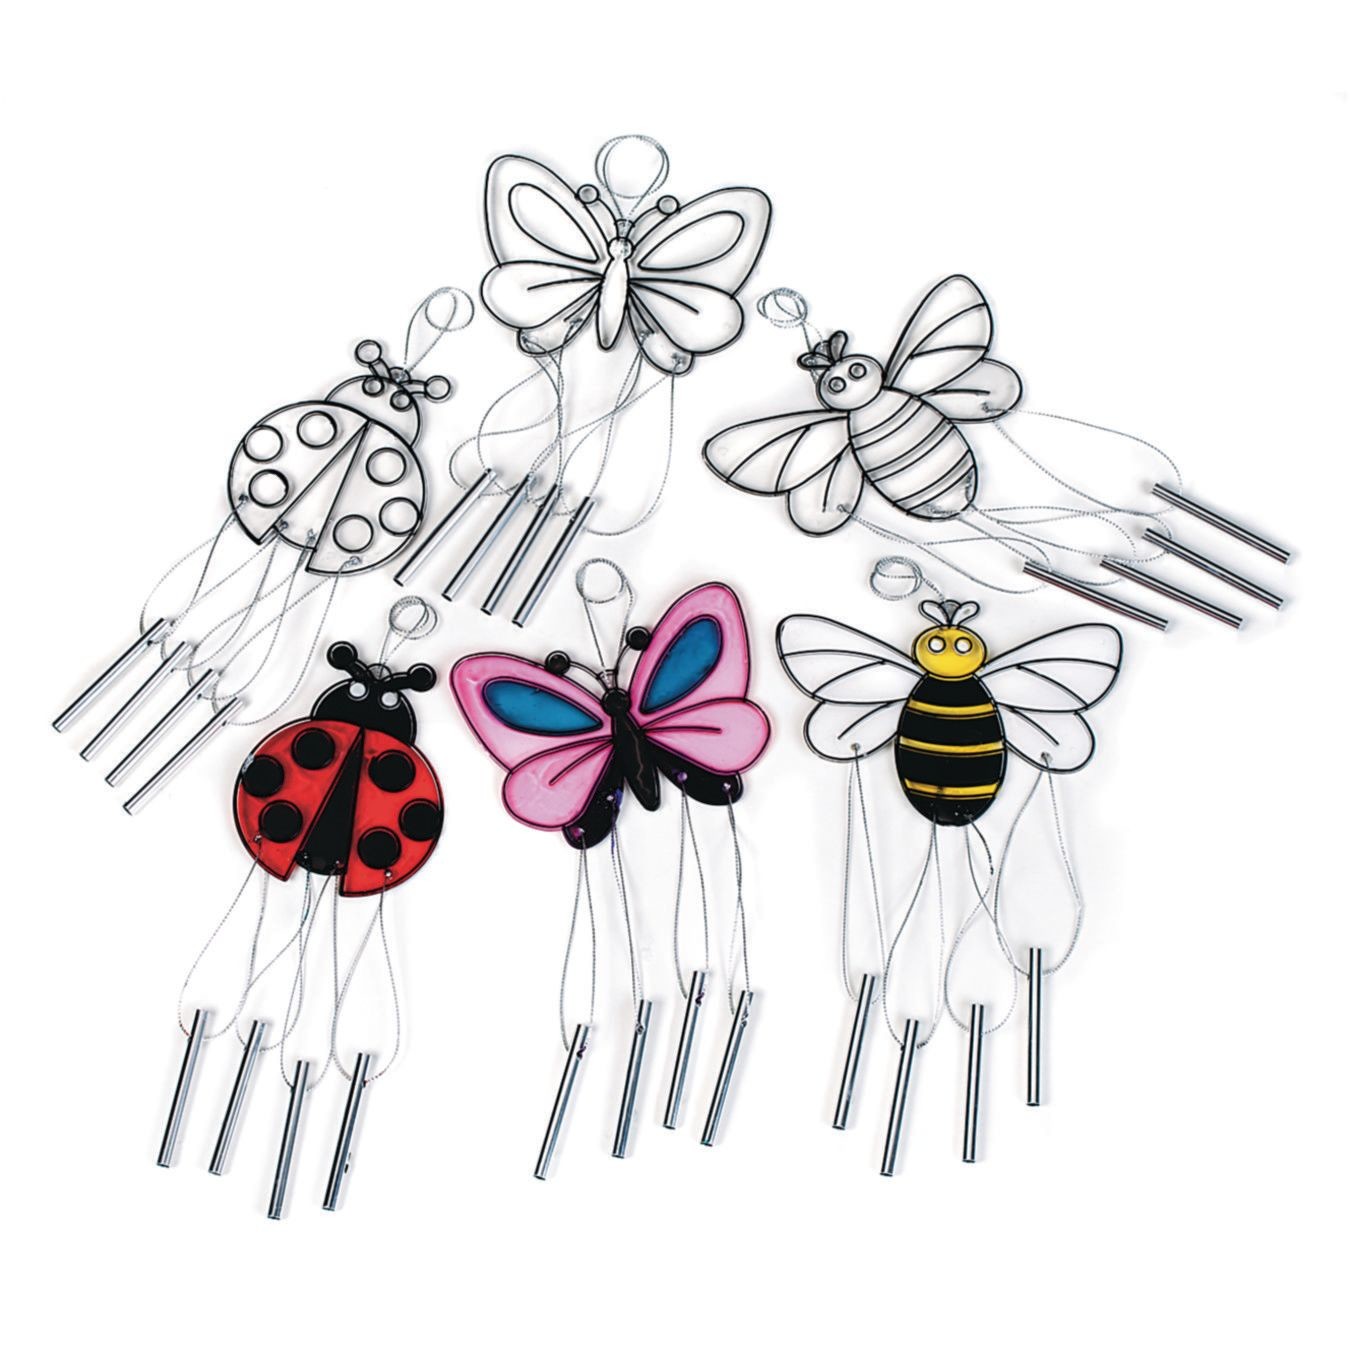 S&S Worldwide Suncatcher Bug Wind Chimes. 4 Ea of 3 Bugs: Ladybug, Butterfly & Bumblebee. Cords & Chimes Incl. 3-1/4" to 5-1/4"W. Hangs Approx. 9". Plastic, Use Markers or Glass Stain, Pack of 12. - image 1 of 2